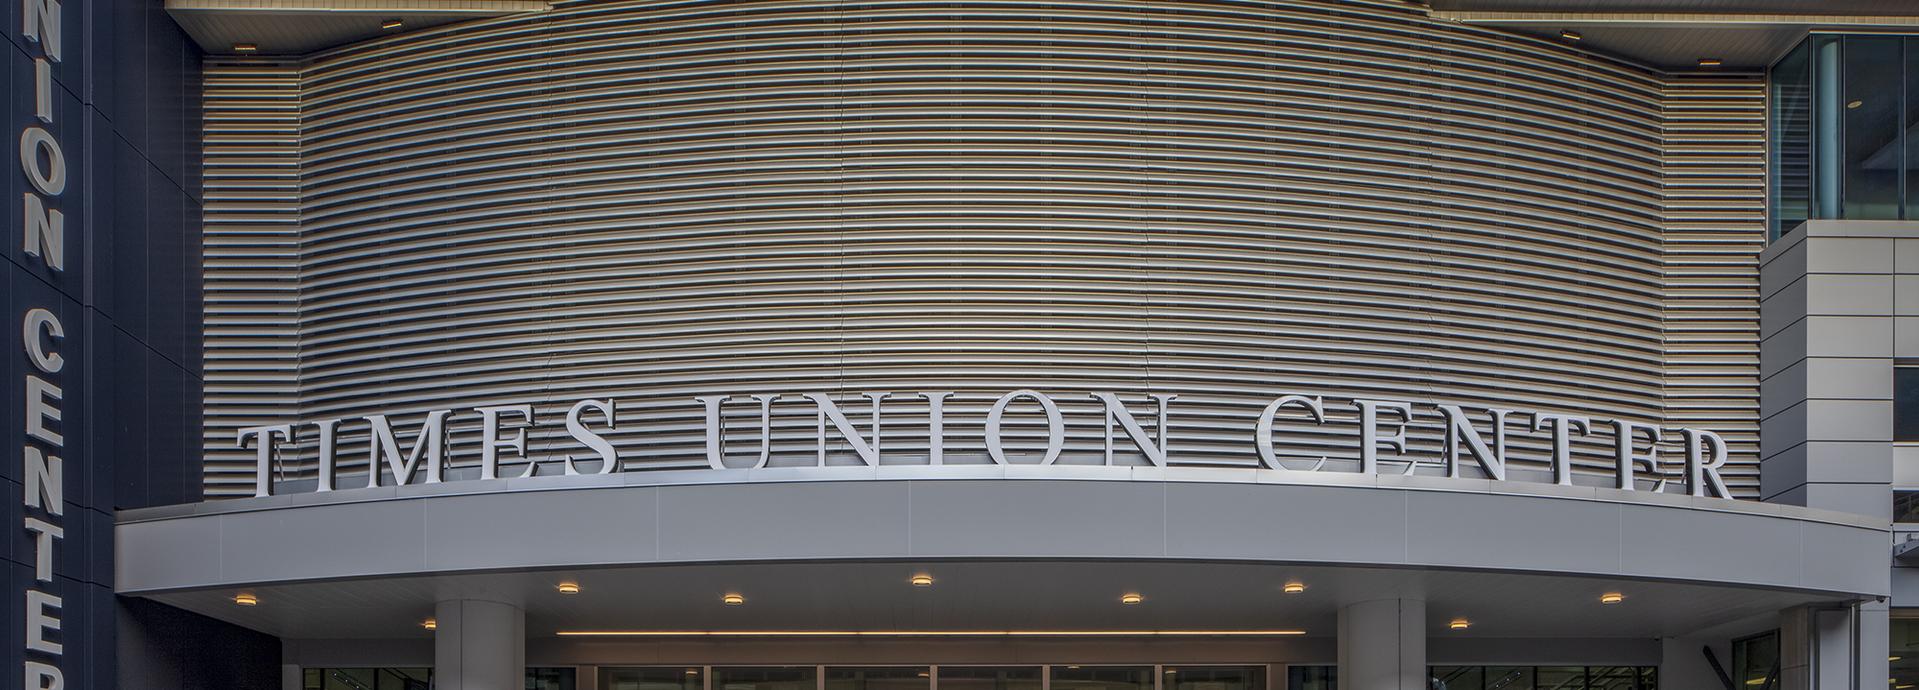 Proof Times Union Center_28A2757.jpg